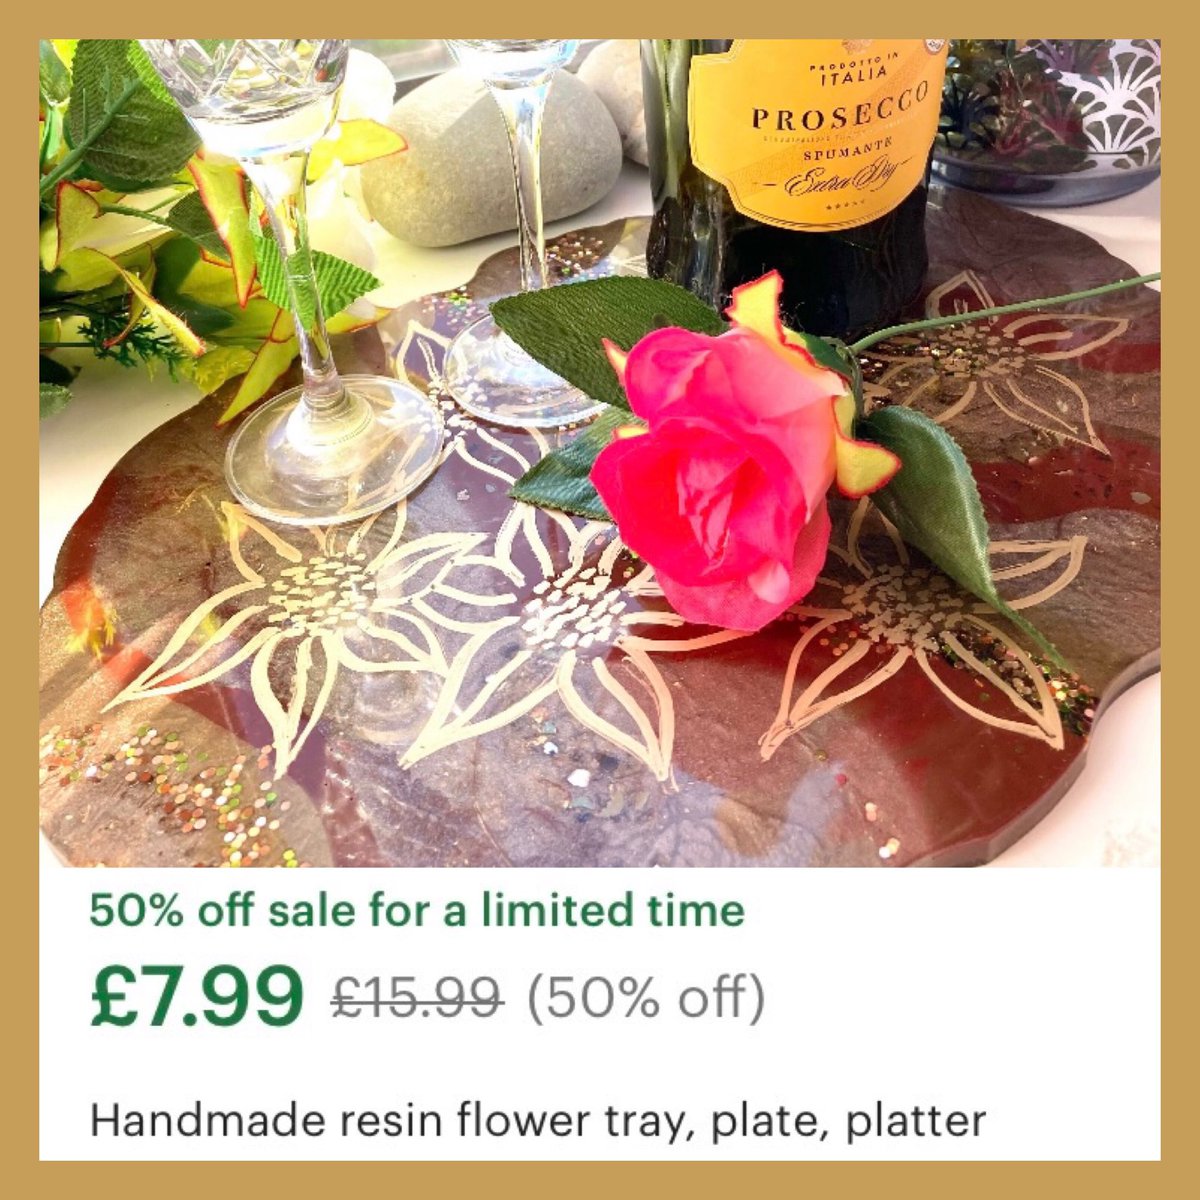 Check out this pretty resin flower design tray, now 50% OFF in the SALE. Perfect as a table centrepiece to dress up the table, with drinks glasses & snacks: muresindesigns.etsy.com/listing/118481… #elevenseshour #craftbizparty #etsyfinds #handmadegift #resin #etsysale